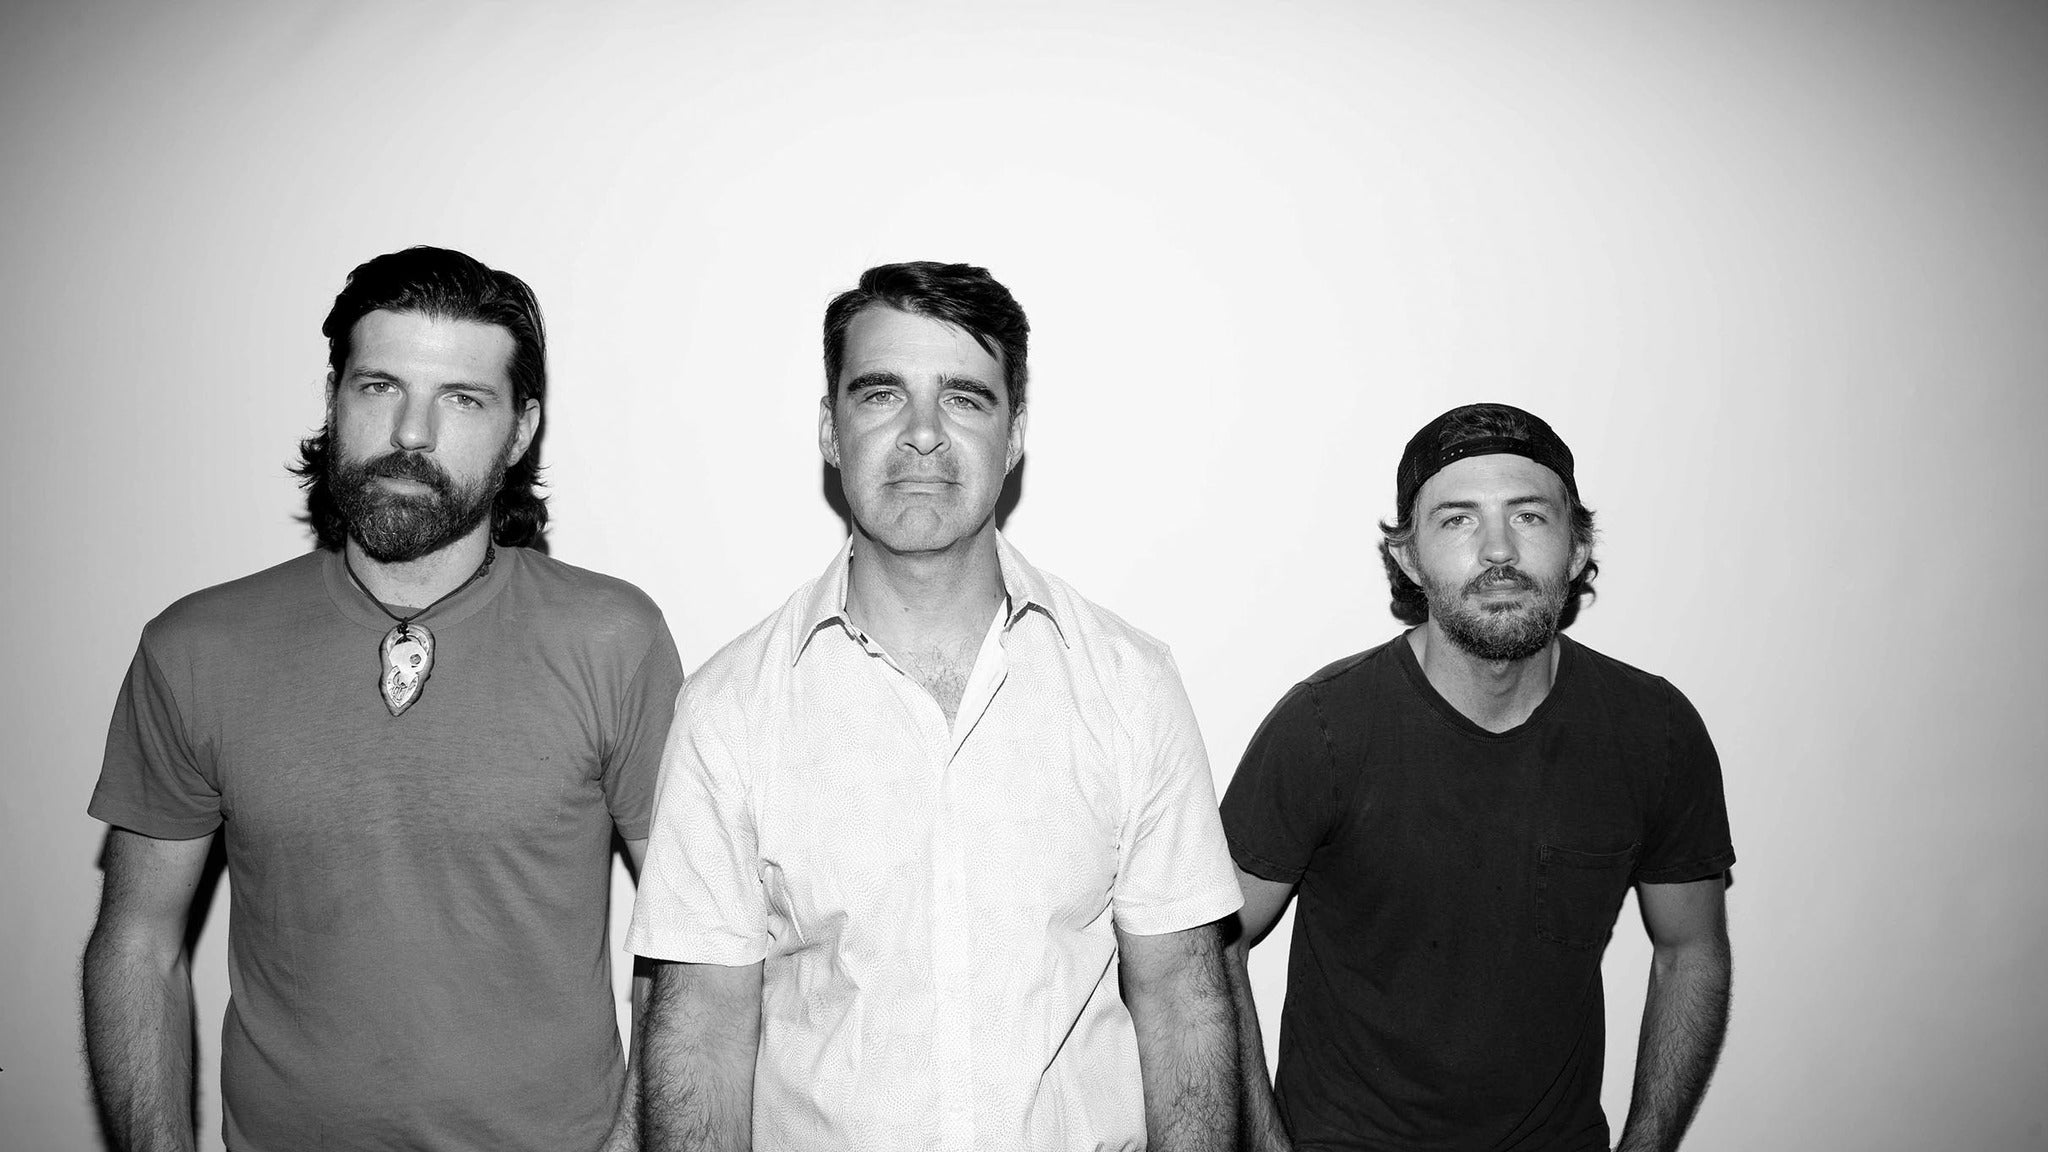 An Evening with The Avett Brothers